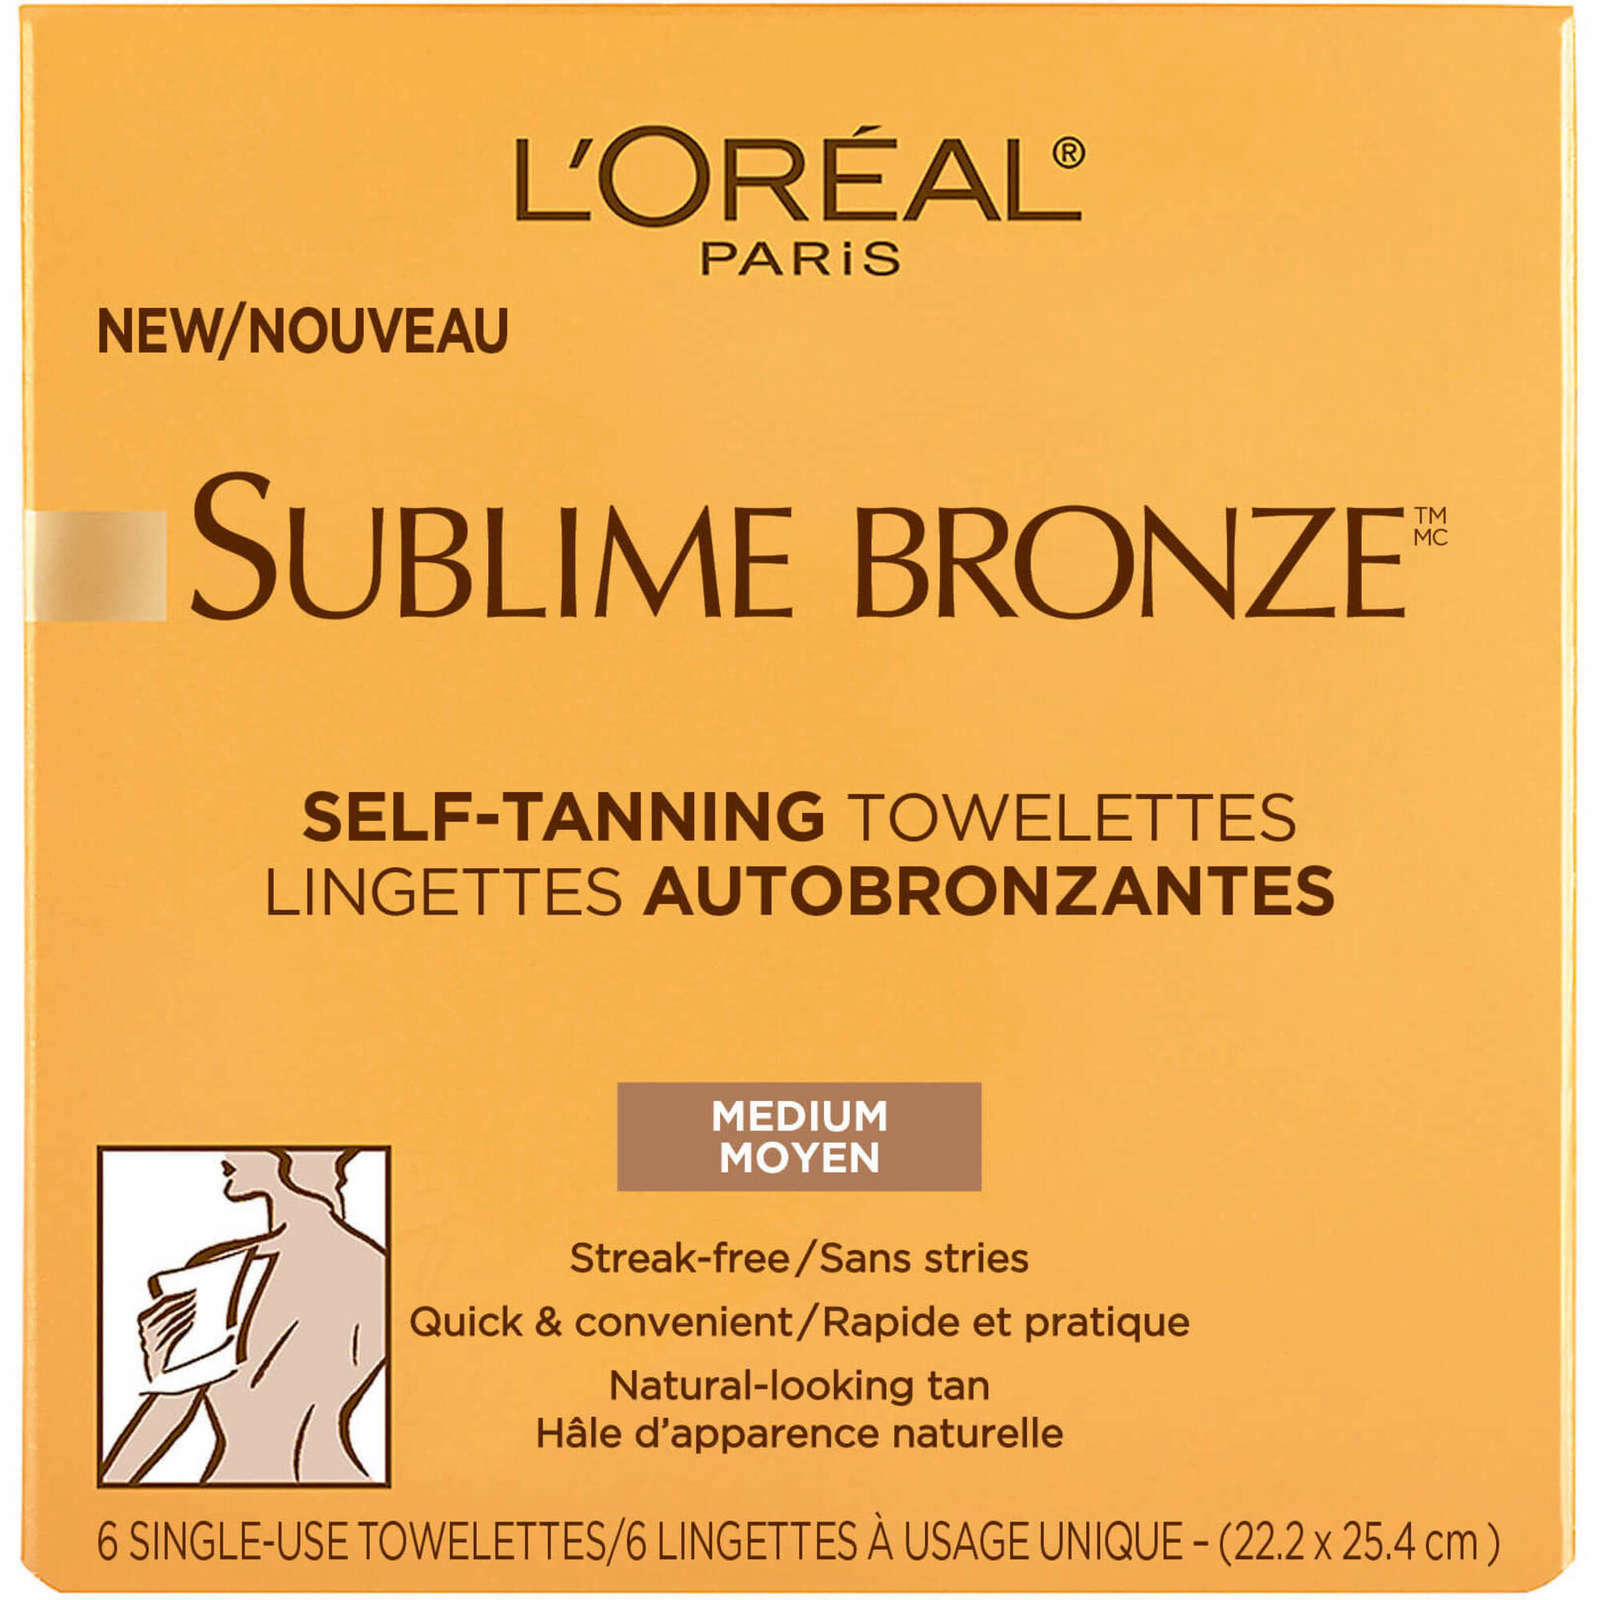 Loreal towelttes